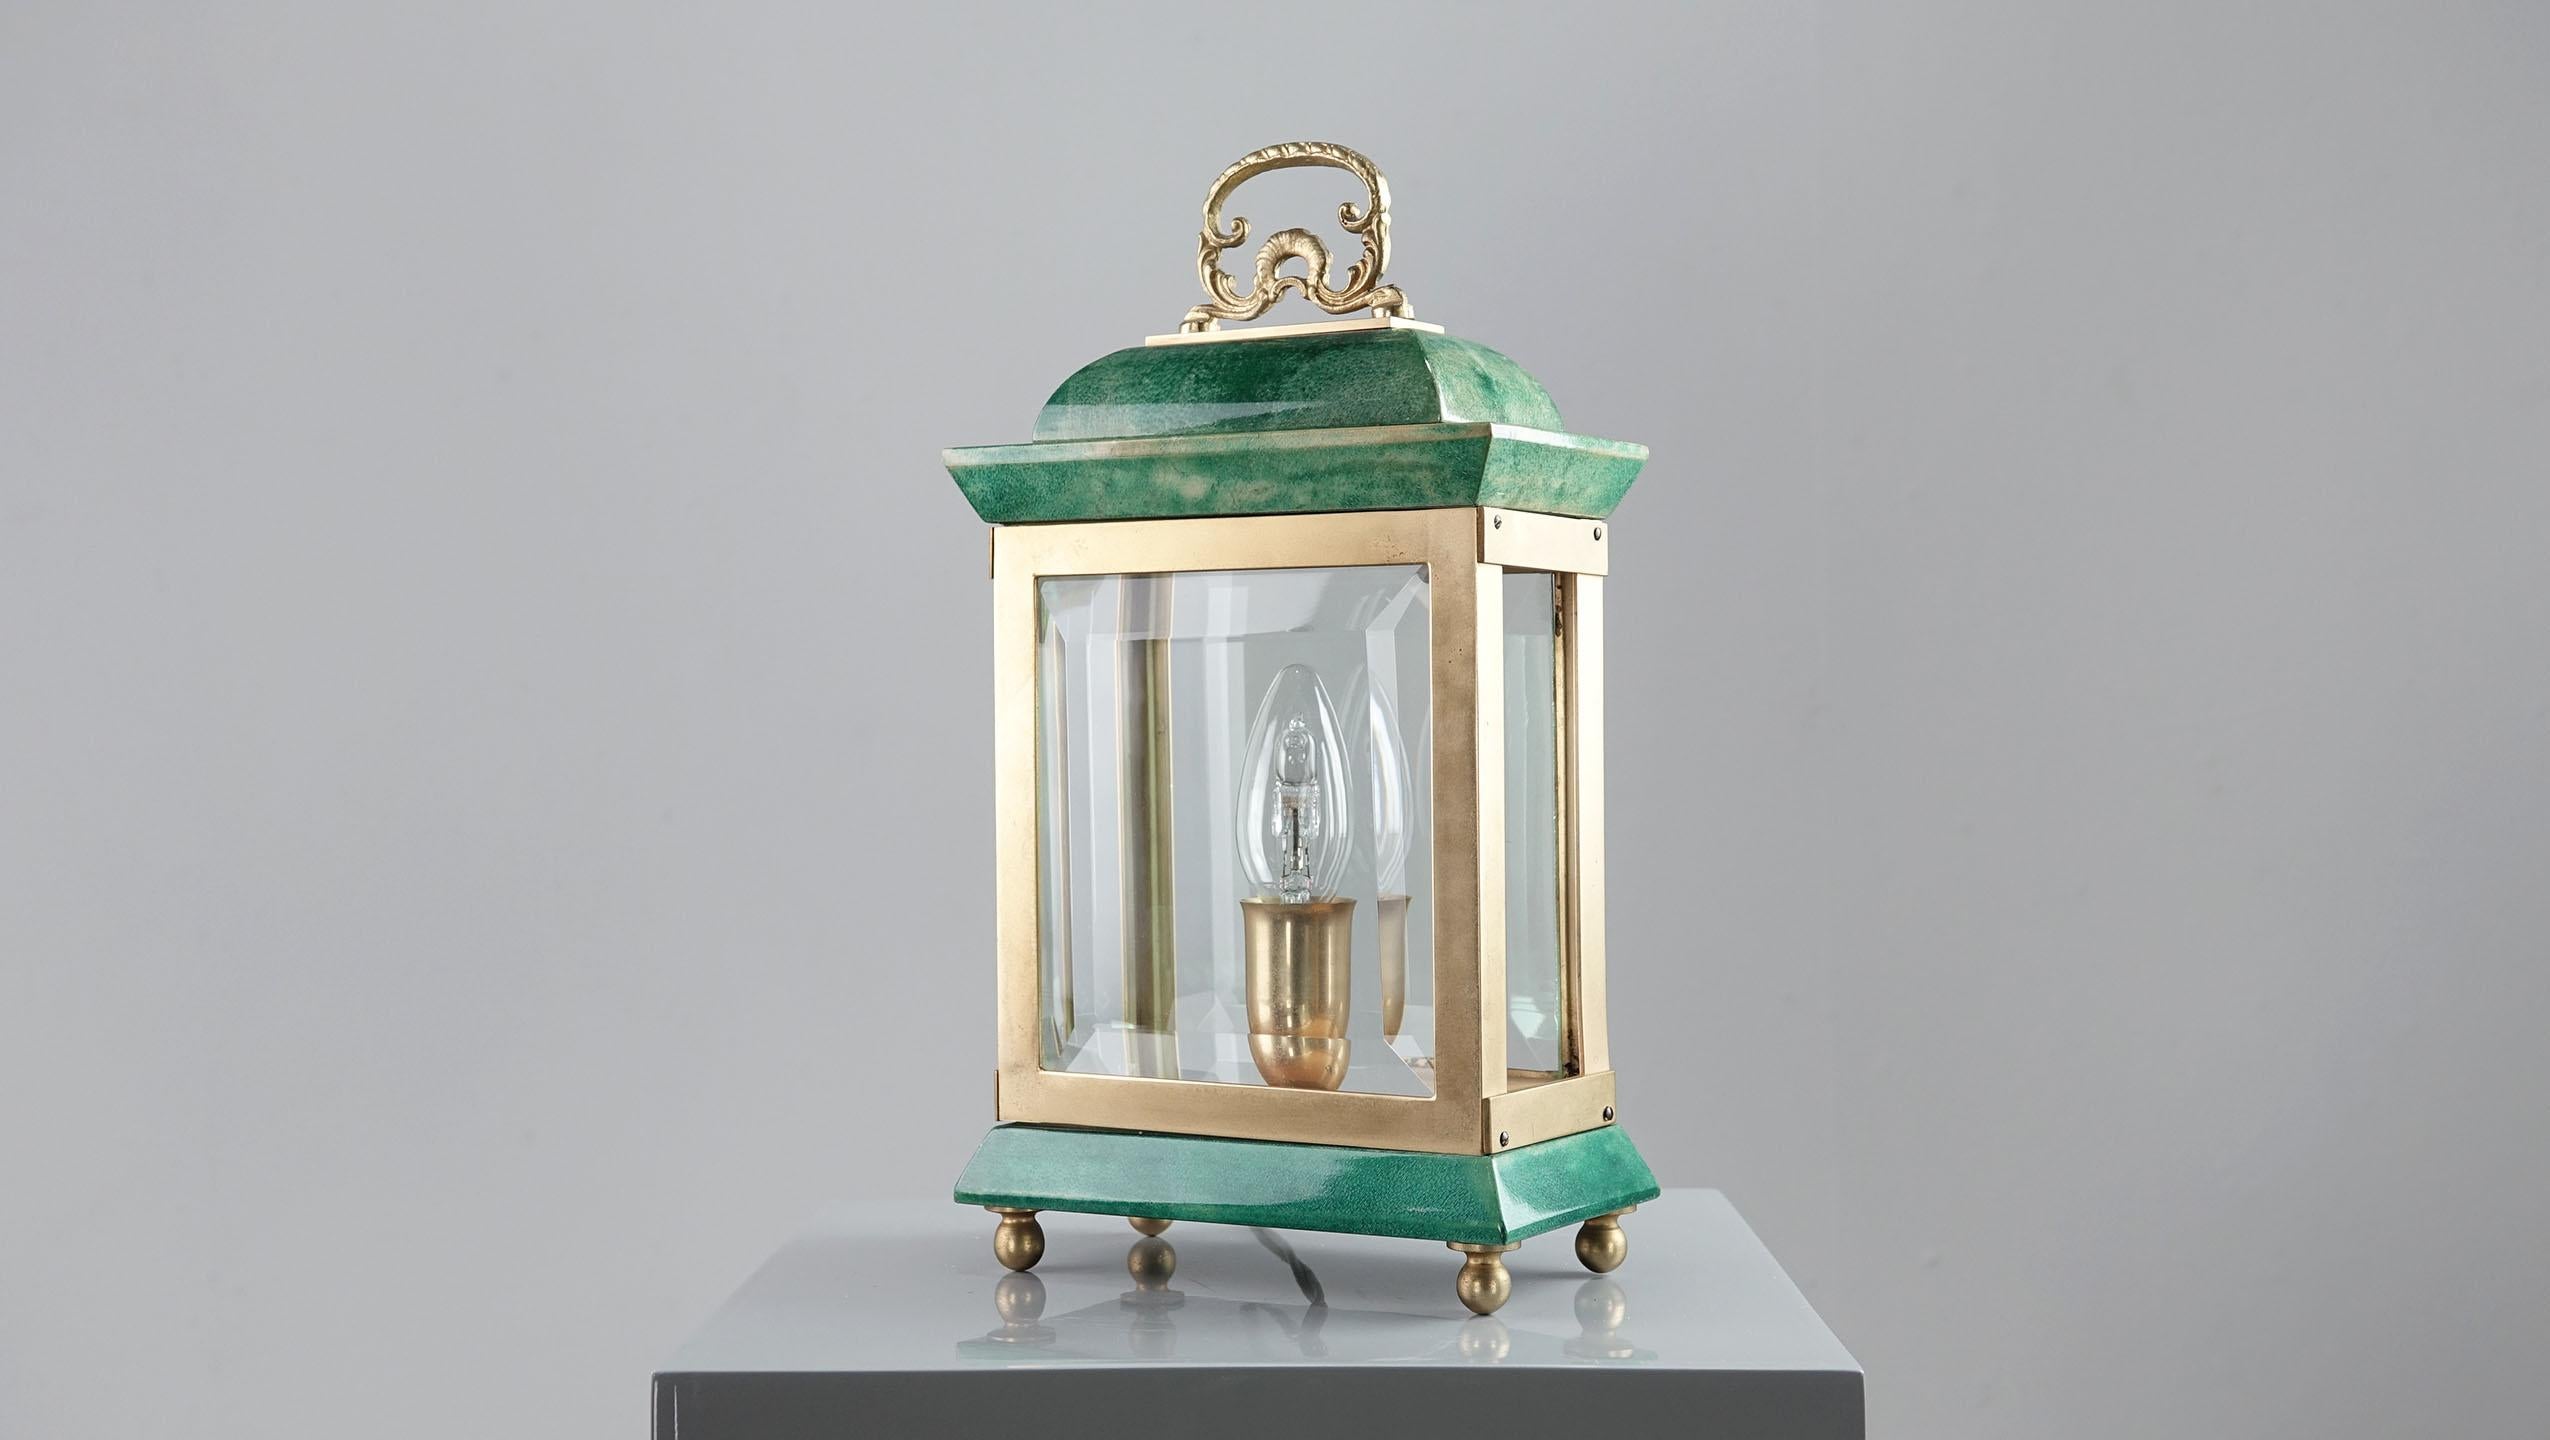 An Aldo Tura table lamp in the shape of a lantern. 
The lantern has been lovingly crafted from lacquered 
goatskin - brass & wood. Normal signs of use.
The lantern is in very good condition.